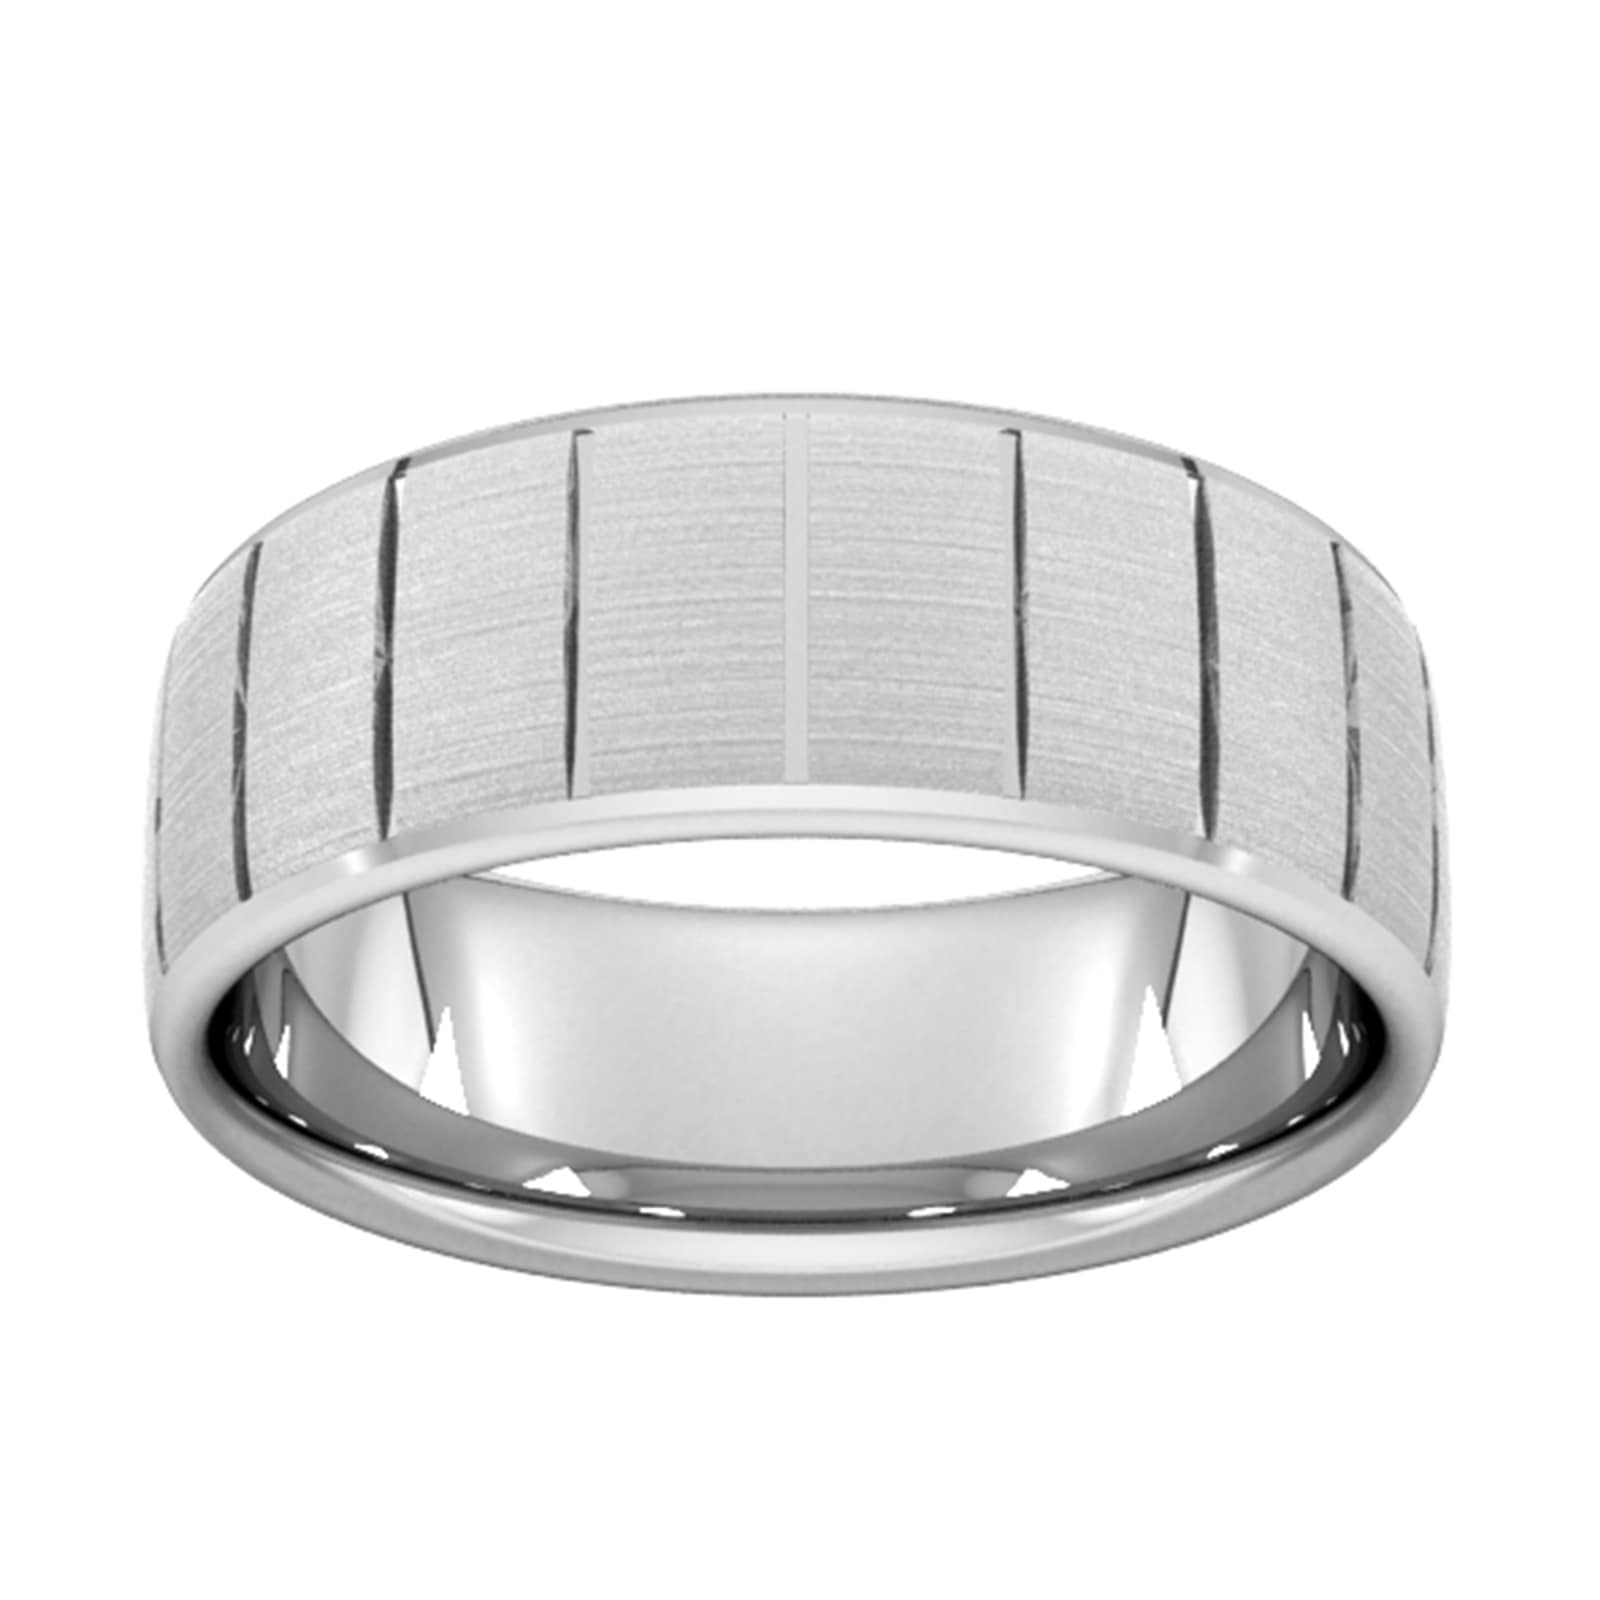 8mm Slight Court Extra Heavy Vertical Lines Wedding Ring In 950 Palladium - Ring Size N